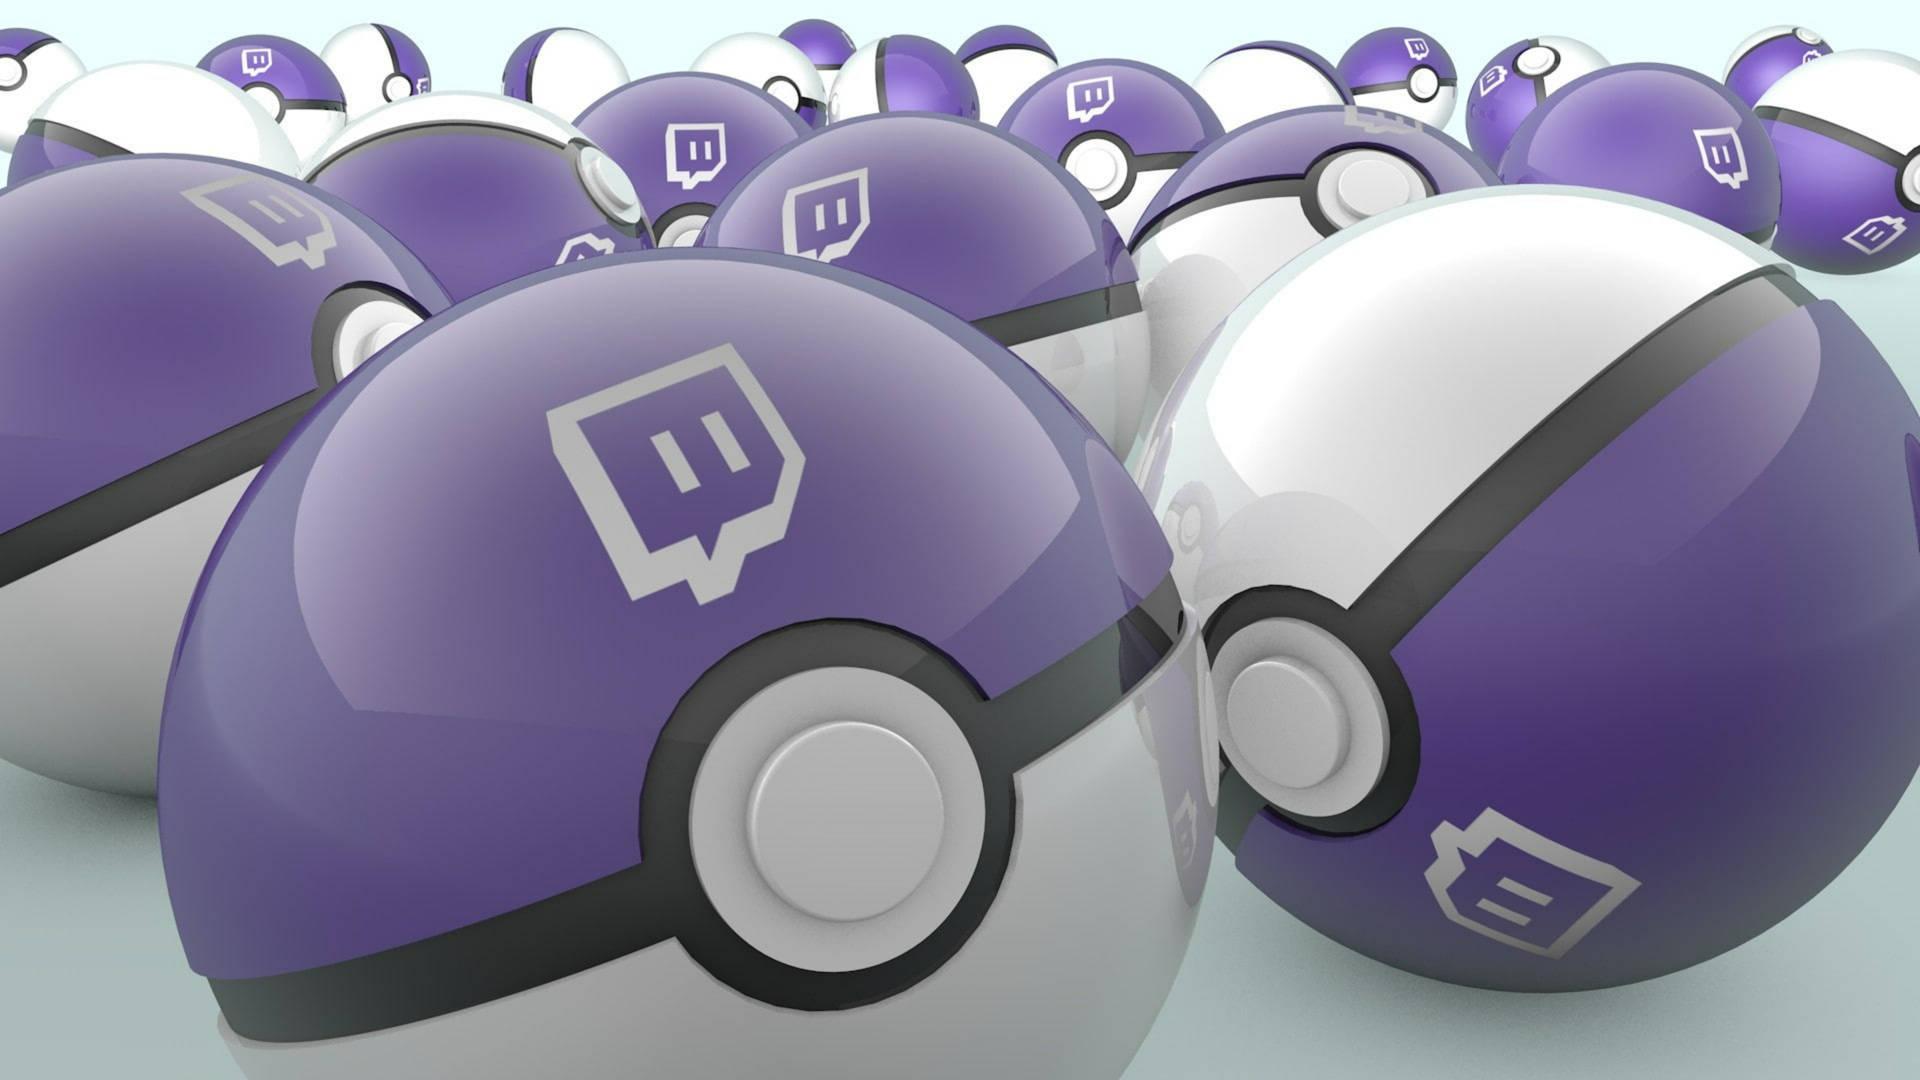 Twitch Icon In Pokeball